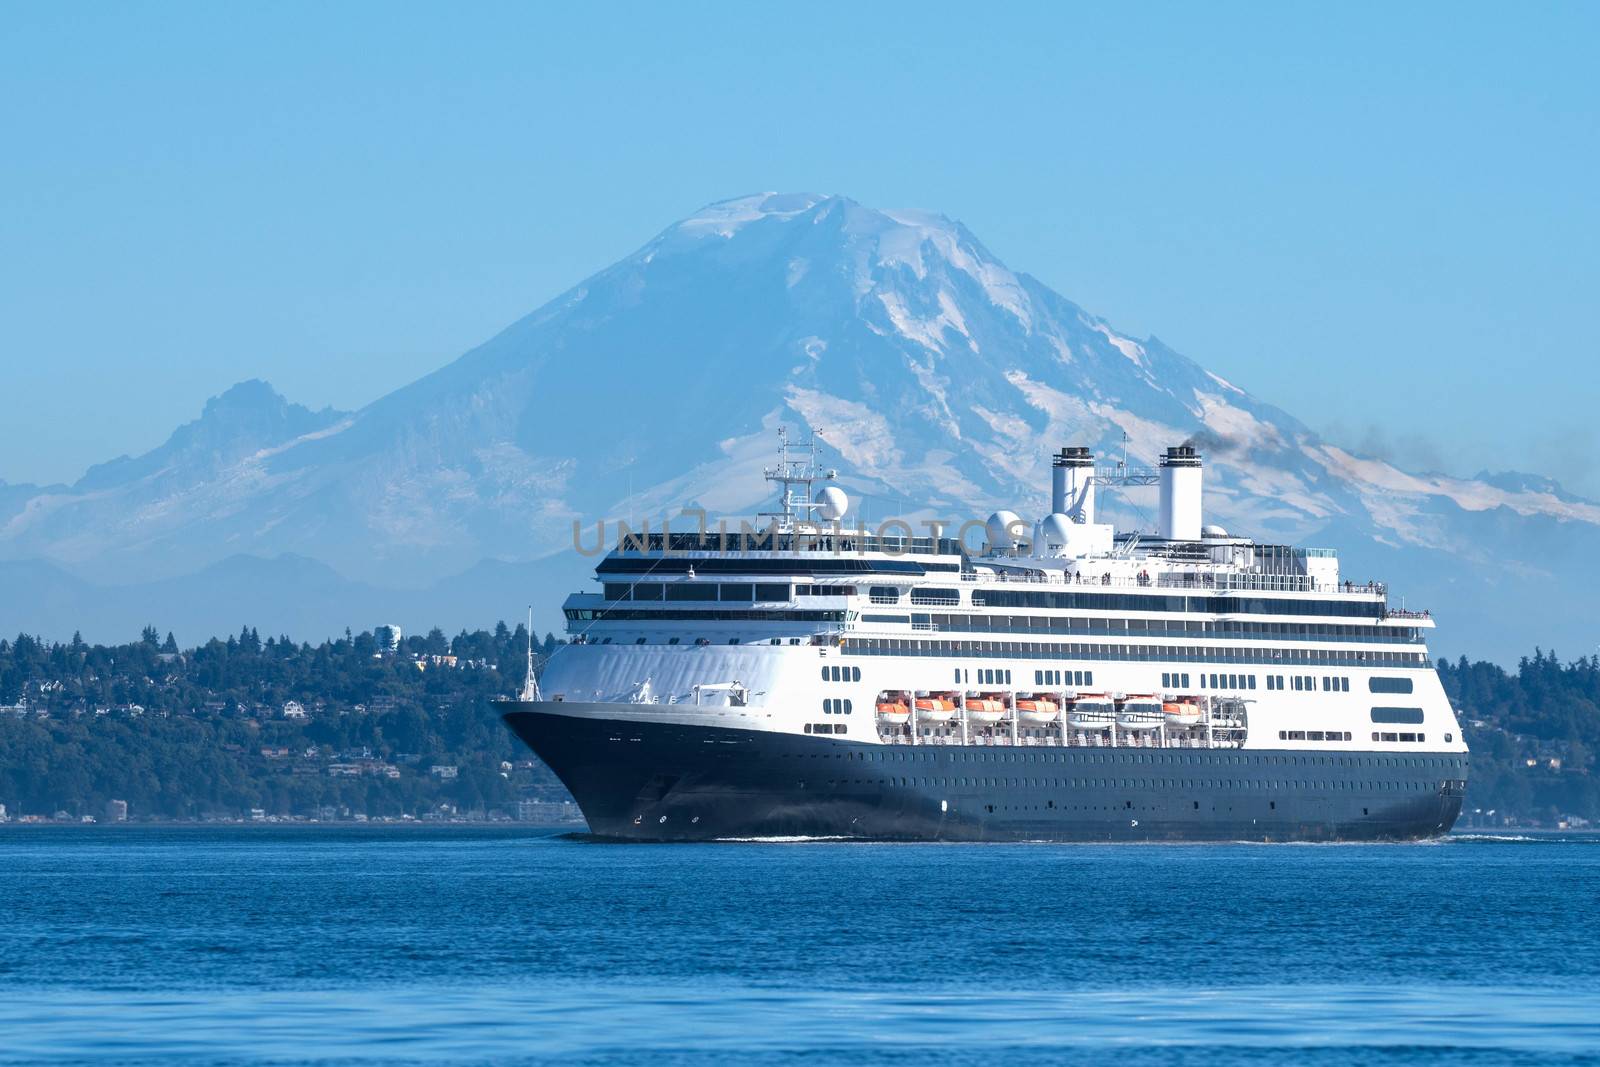 Cruise Ship, Puget Sound, and Mount Rainier by cestes001